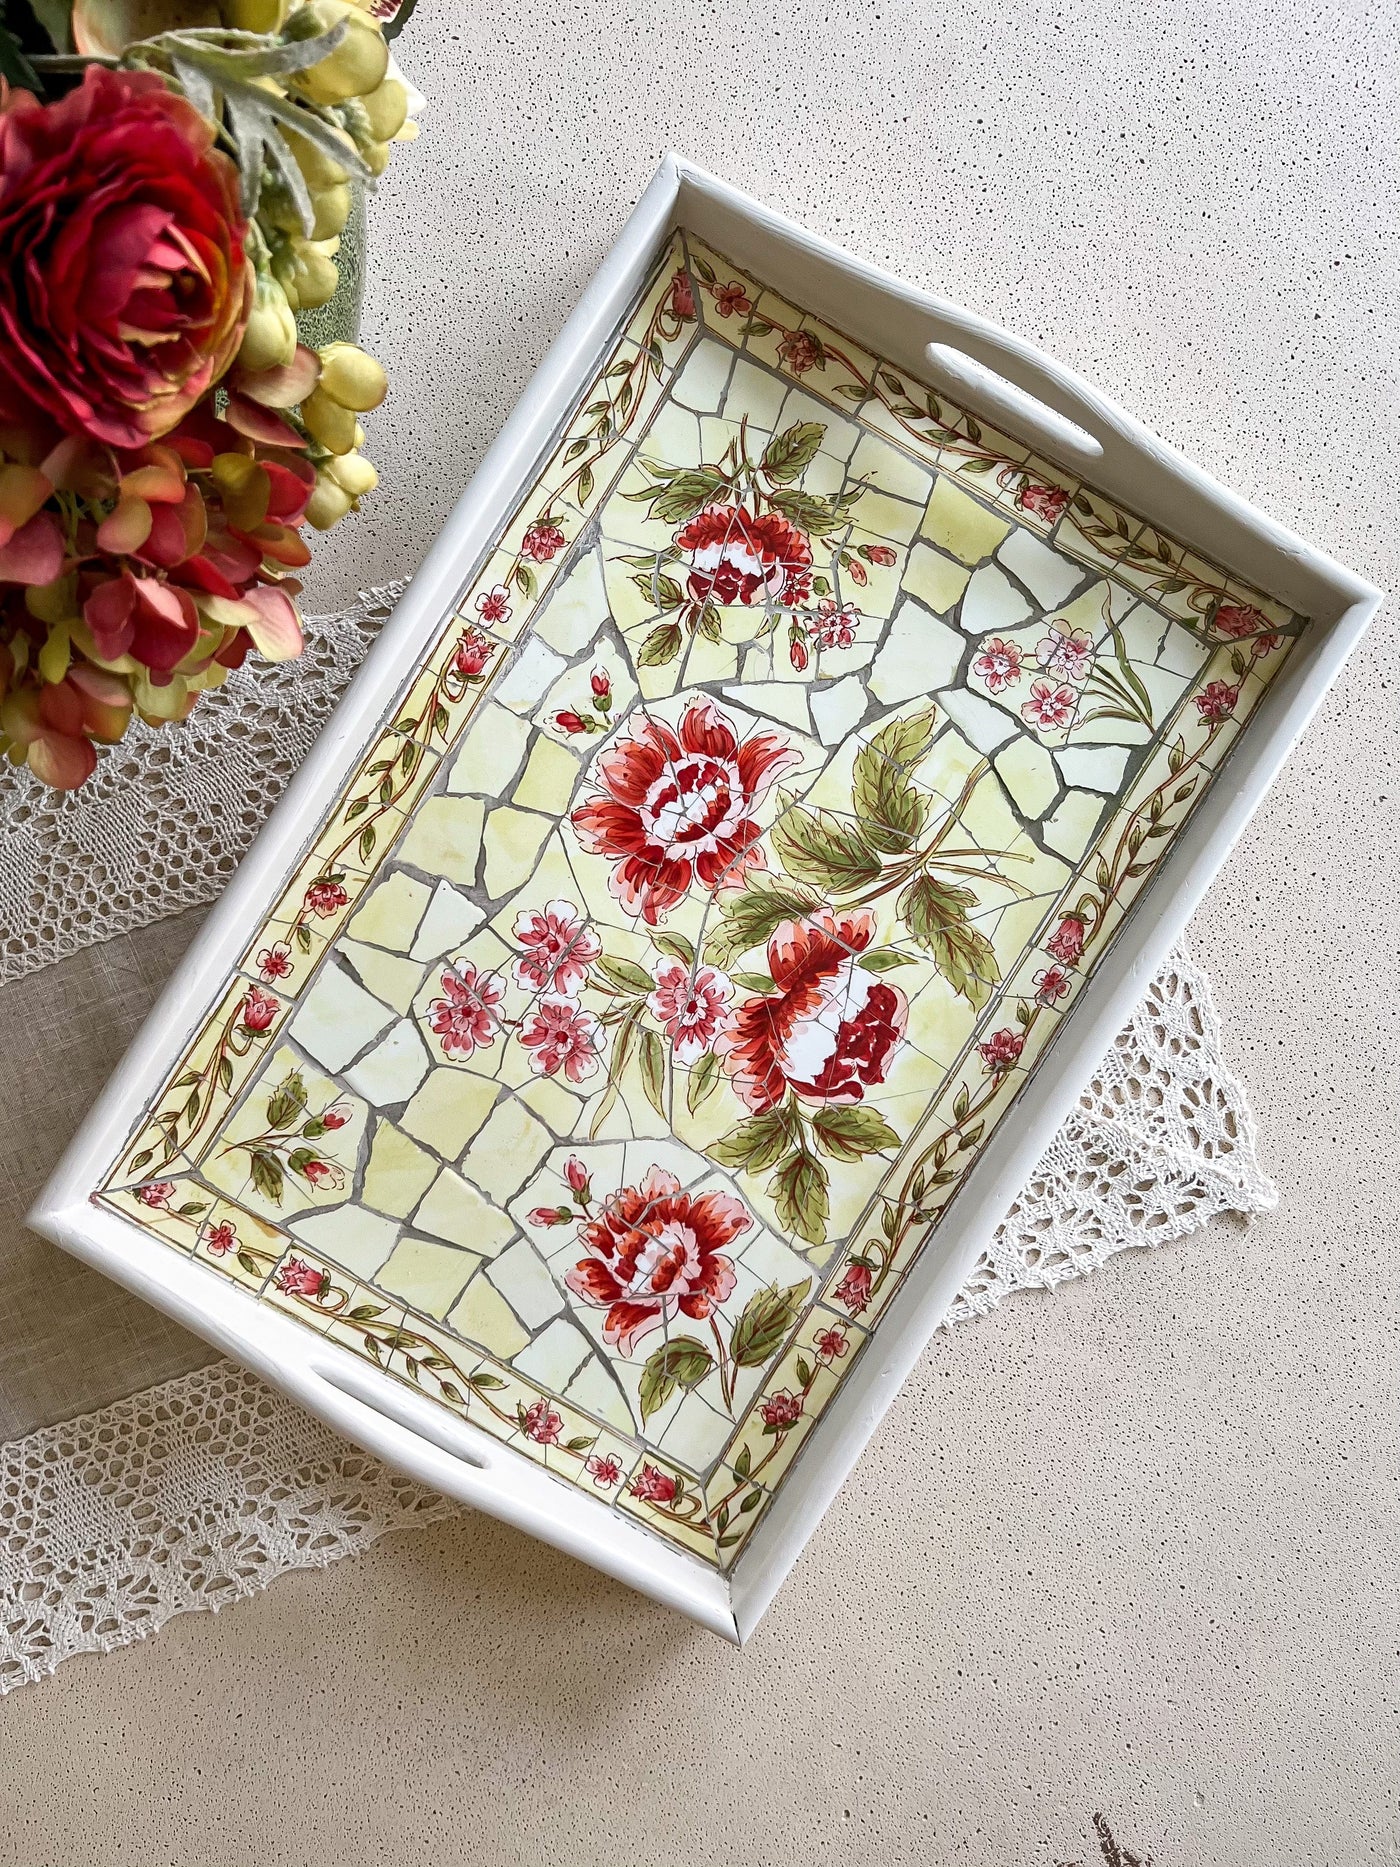 Handcrafted Vintage Red Floral Mosaic Serving Tray Revive In Style Vintage Furniture Painted Refinished Redesign Beautiful One of a Kind Artistic Antique Unique Home Decor Interior Design French Country Shabby Chic Cottage Farmhouse Grandmillenial Coastal Chalk Paint Metallic Glam Eclectic Quality Dovetailed Rustic Furniture Painter Pinterest Bedroom Living Room Entryway Kitchen Home Trends House Styles Decorating ideas